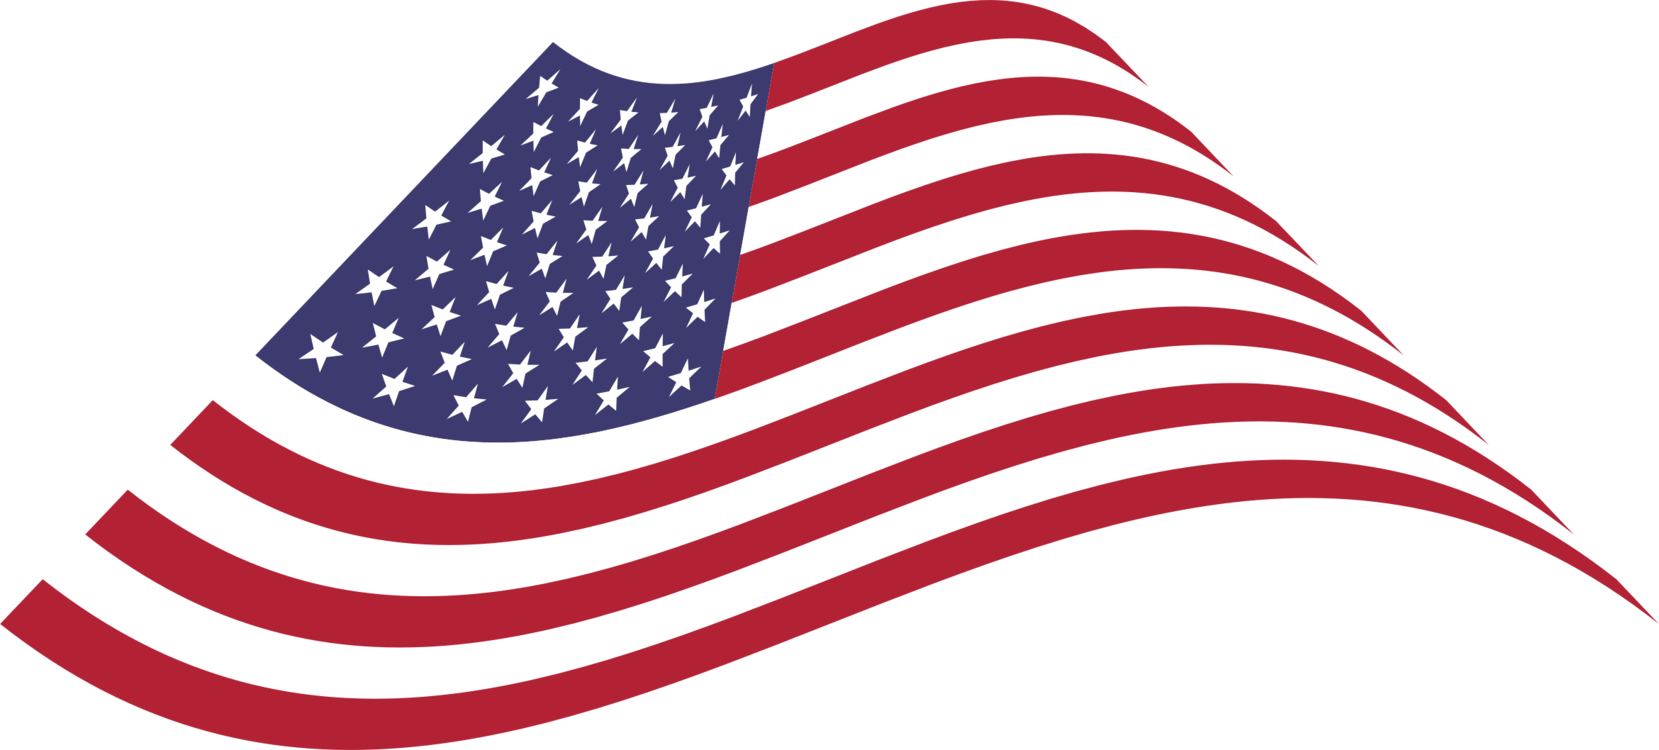 Flag Of The United States,Line,United States Of America